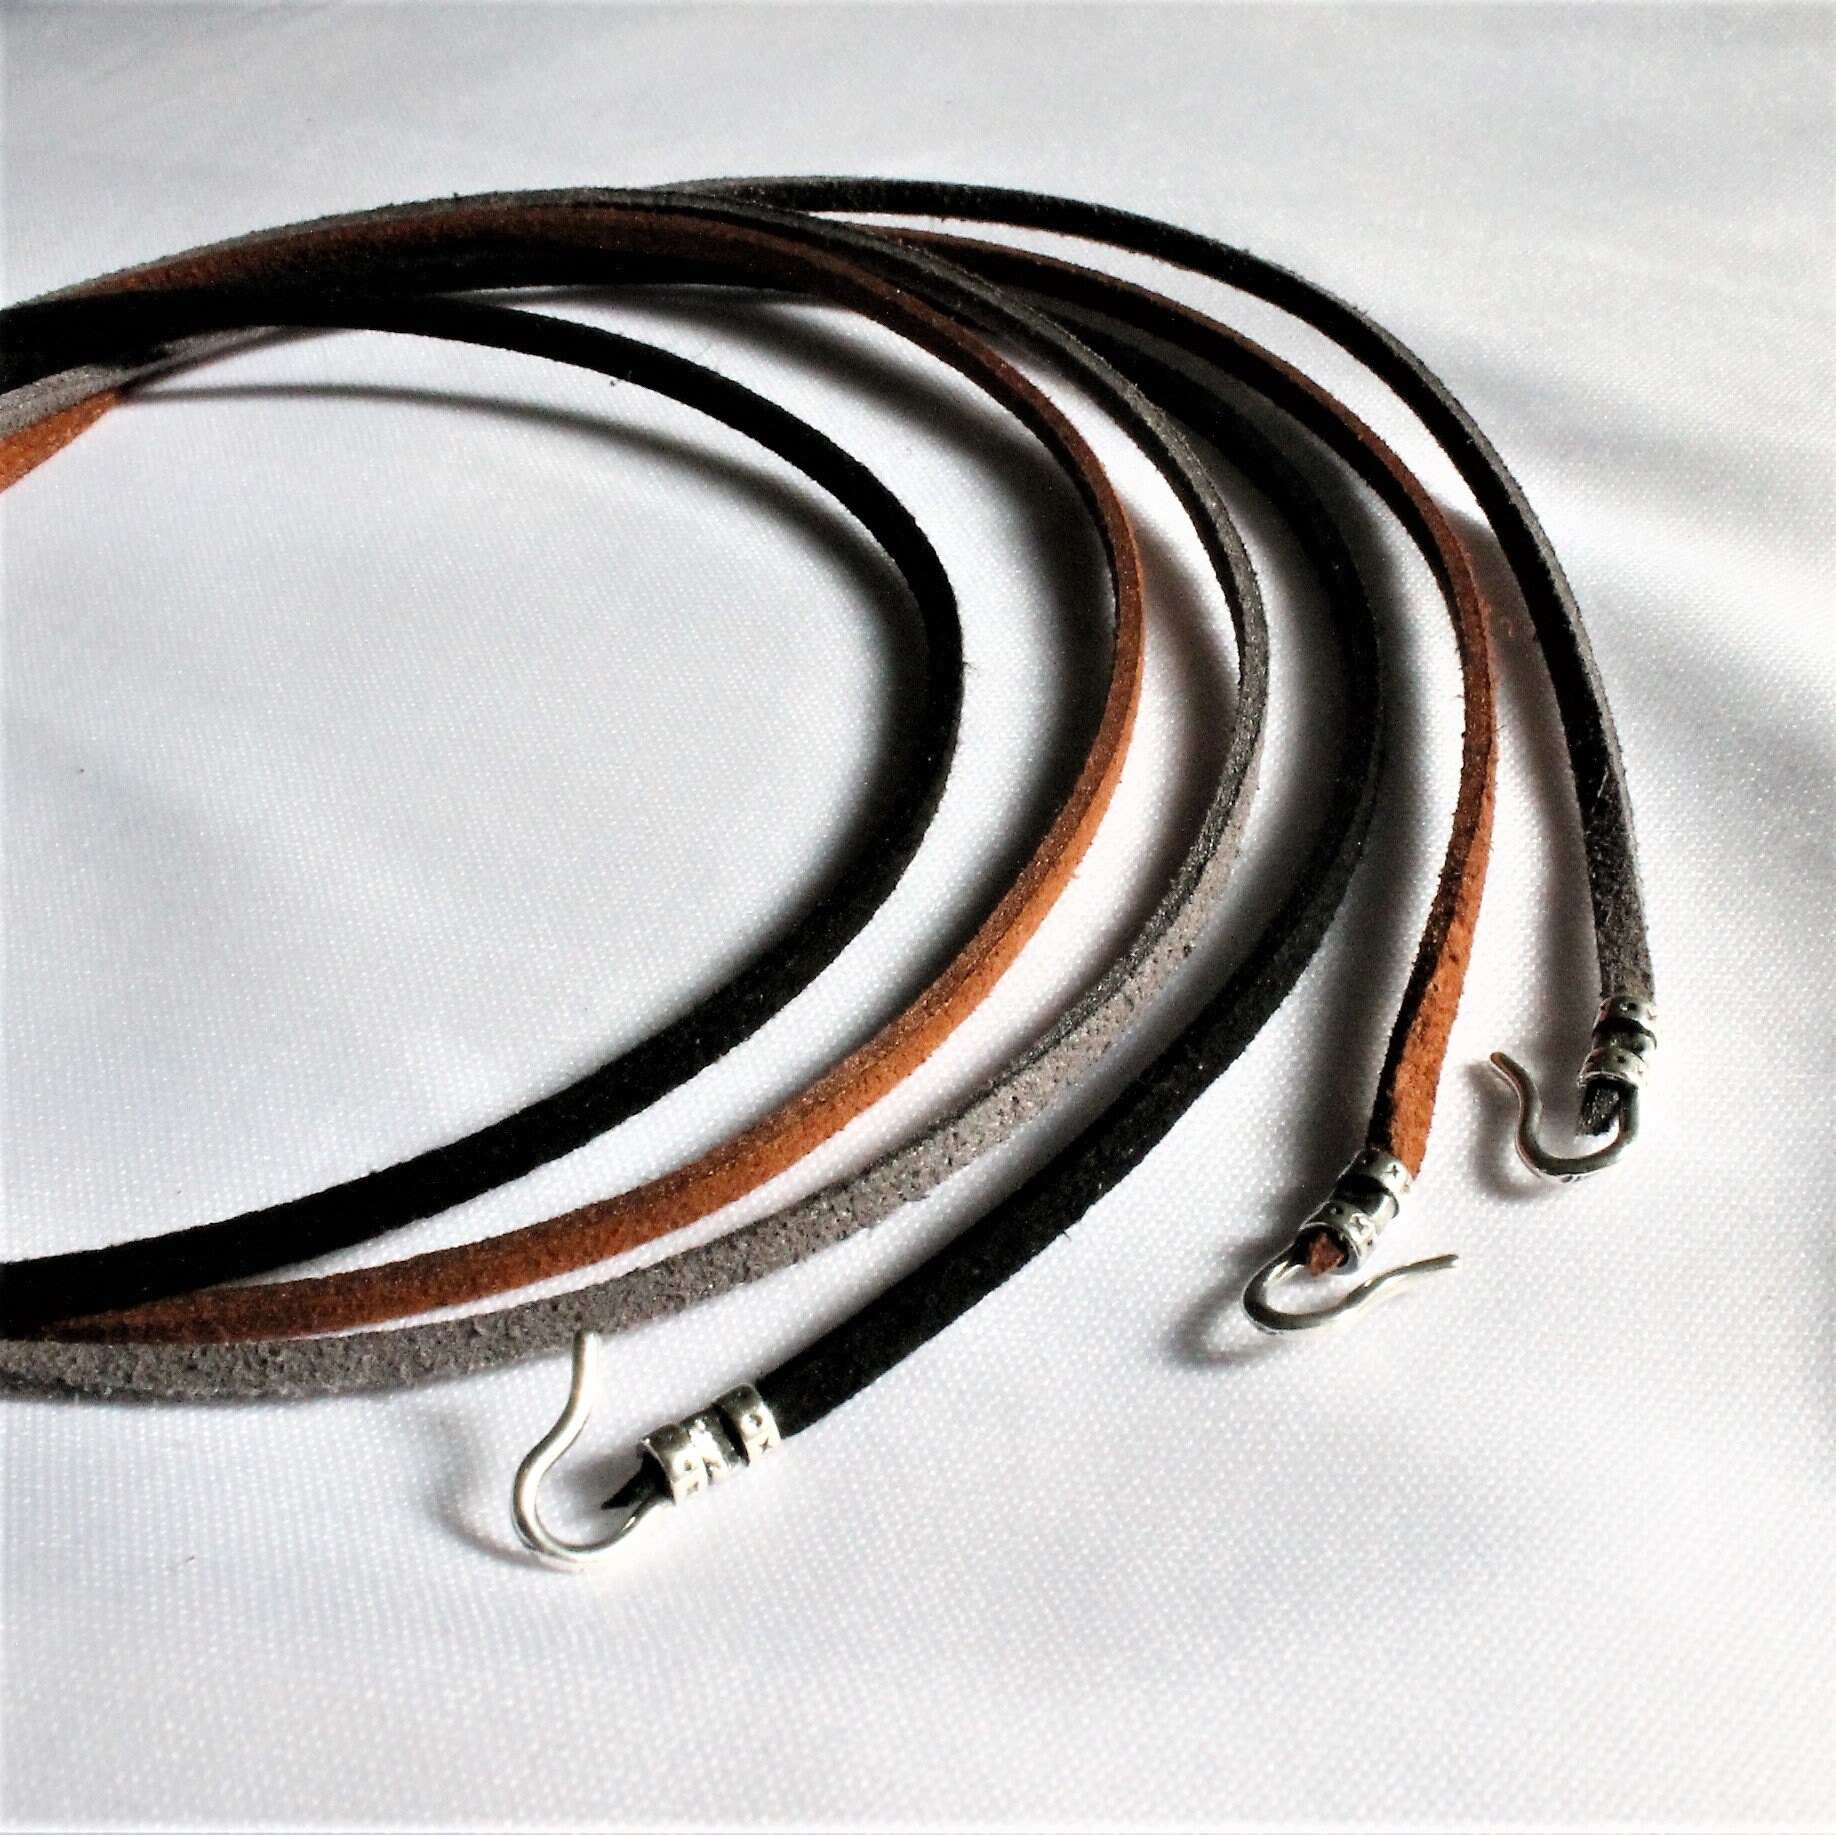 3mm Flat Faux Suede Cord: Faux Leather, 100% Vegan Cruelty Free, Sold by  Yard or Spool, Natural Color String Lace Tan Brown Black, Fast S&H -   Denmark